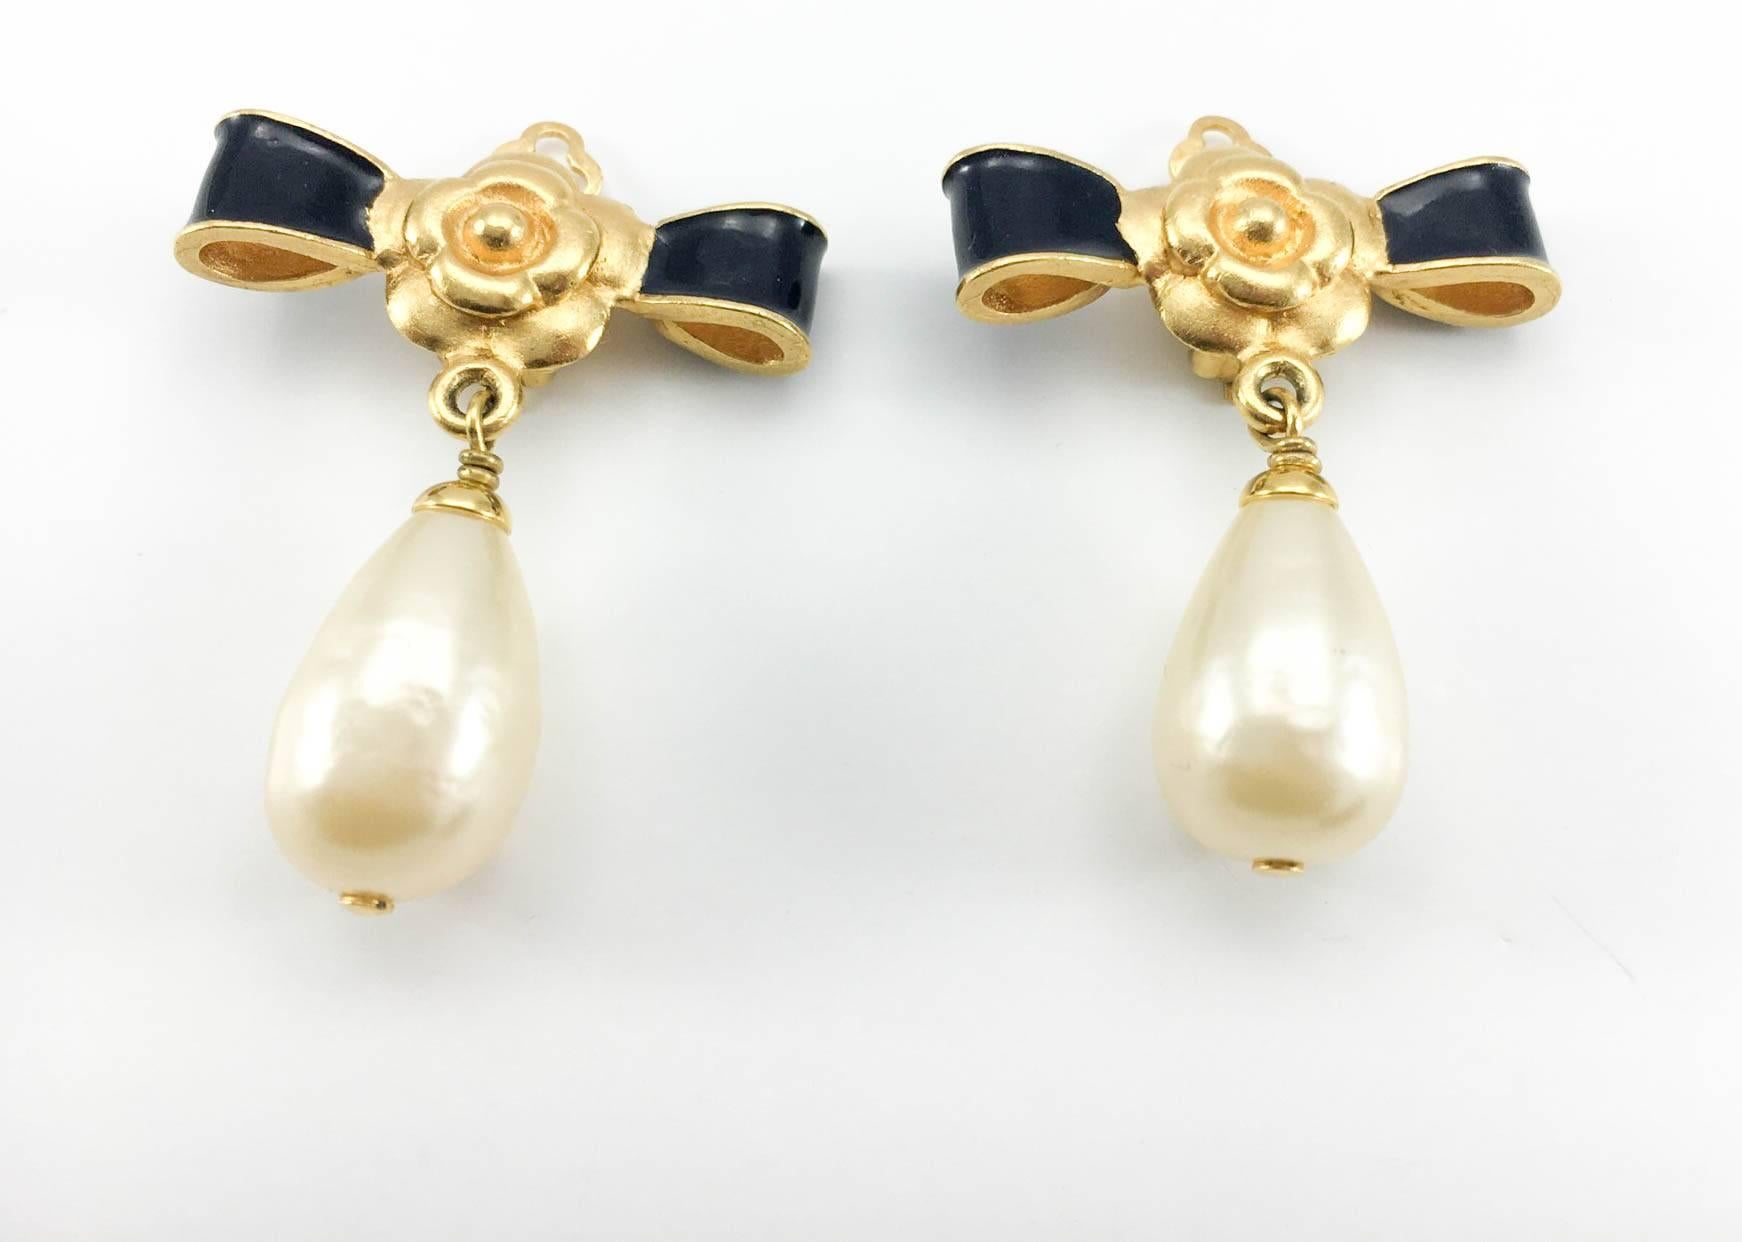 Gorgeous Vintage Chanel Camellia, Bow and Drop Pearl Clip-On Earrings. These fabulous earrings by Chanel are part of the 1993 Fall/Winter Collection. Gold-Plated, they feature an enamelled black bow with a gold-tone camellia (the flower of choice at